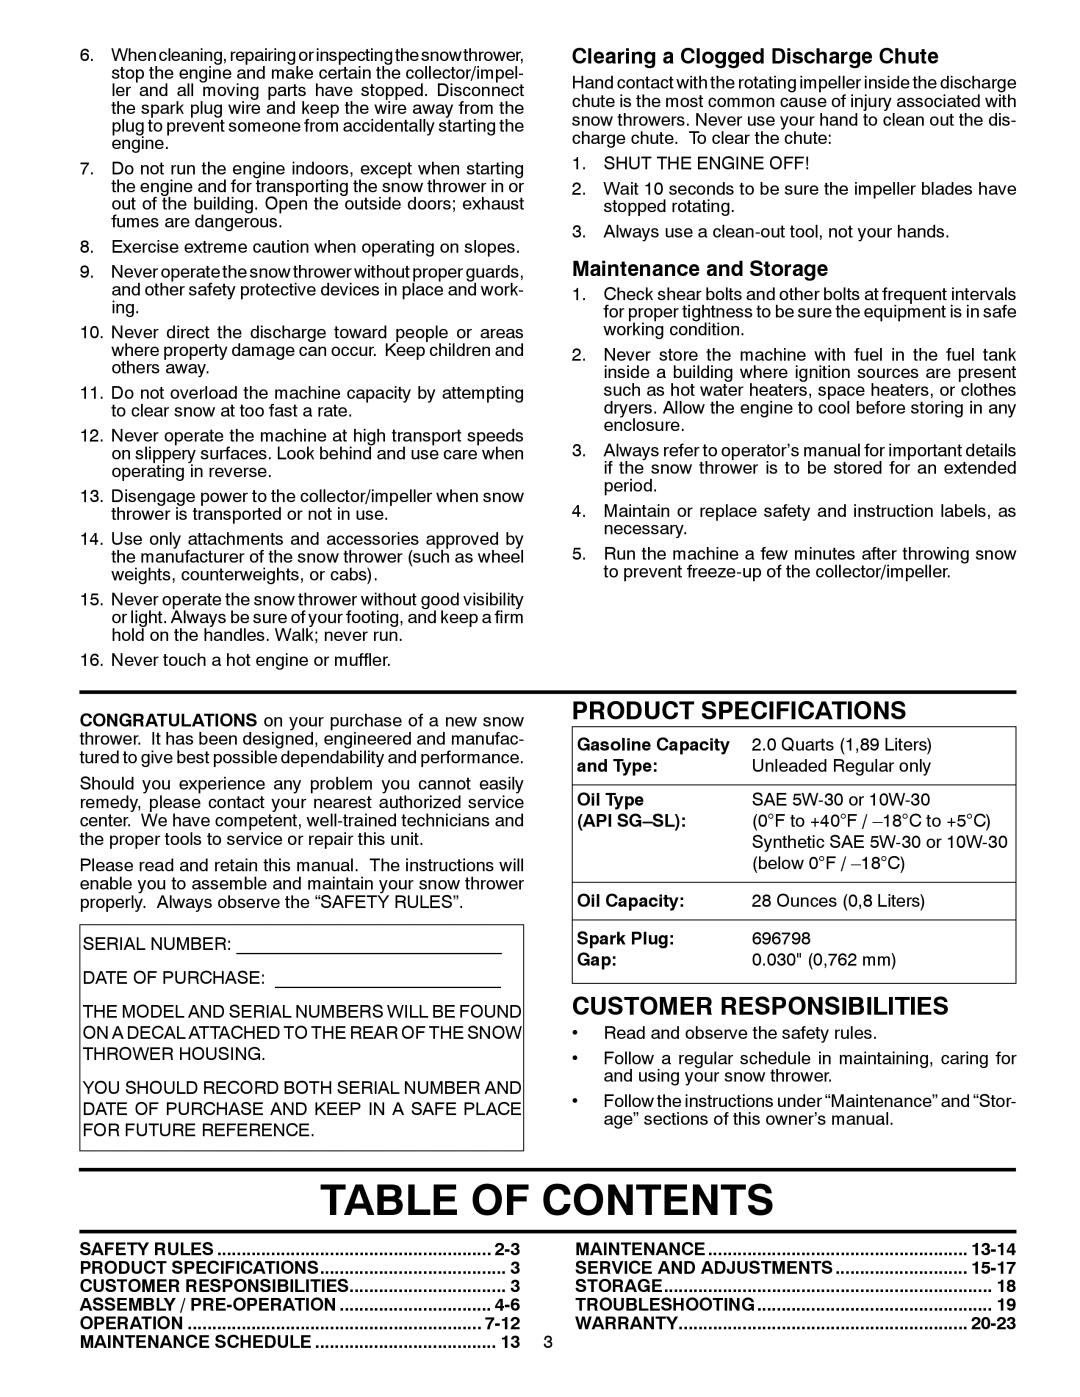 Husqvarna 96193006400 Table Of Contents, Clearing a Clogged Discharge Chute, Maintenance and Storage, Gasoline Capacity 